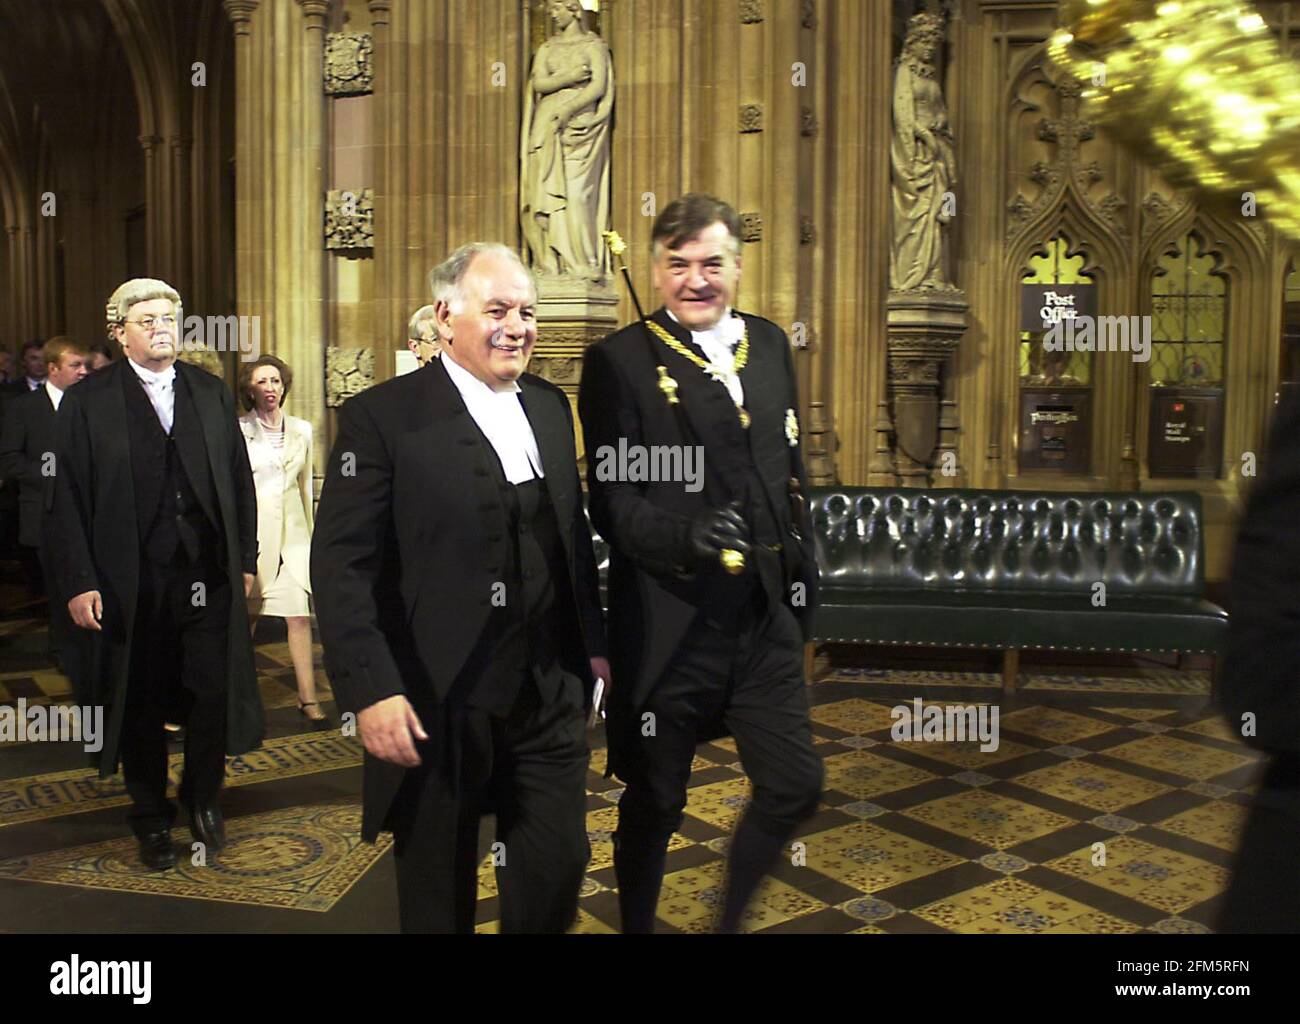 Michael Martin New Speaker of the House of Commons, Oct 2000  processing through central lobby after visiting the lords to confirm his appointment. He is with black rod. Stock Photo